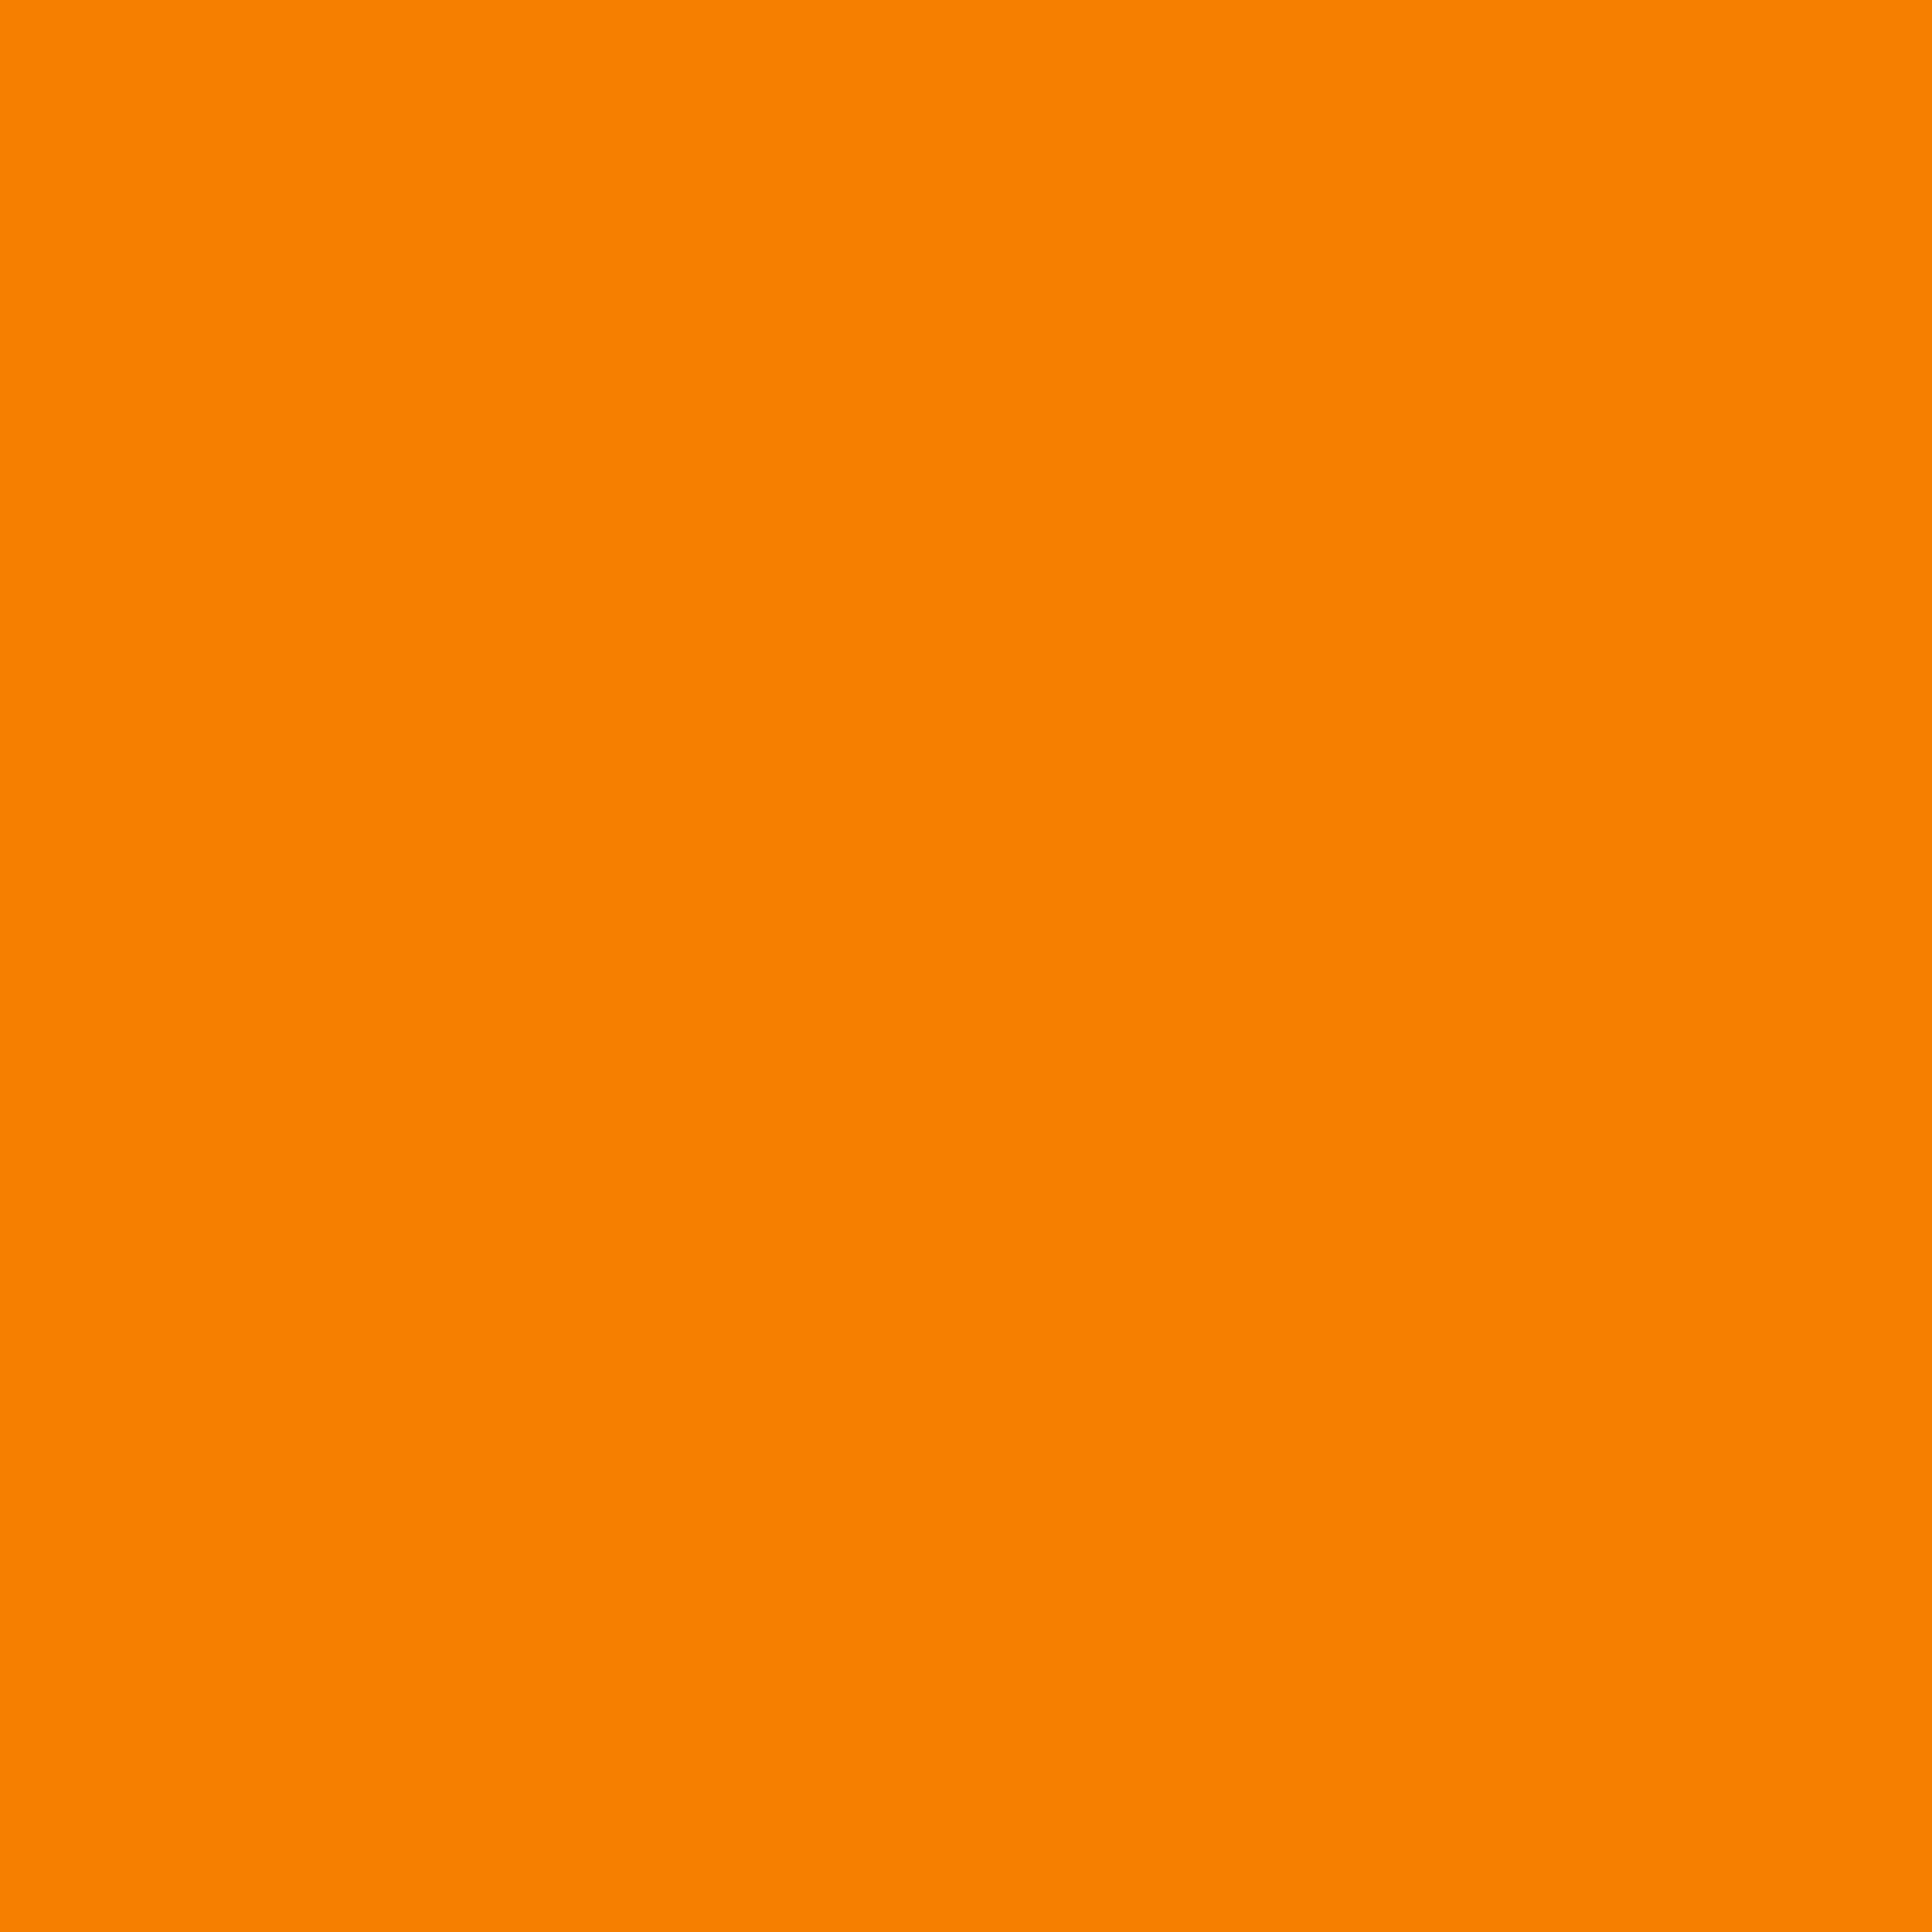 3600x3600 University Of Tennessee Orange Solid Color Background